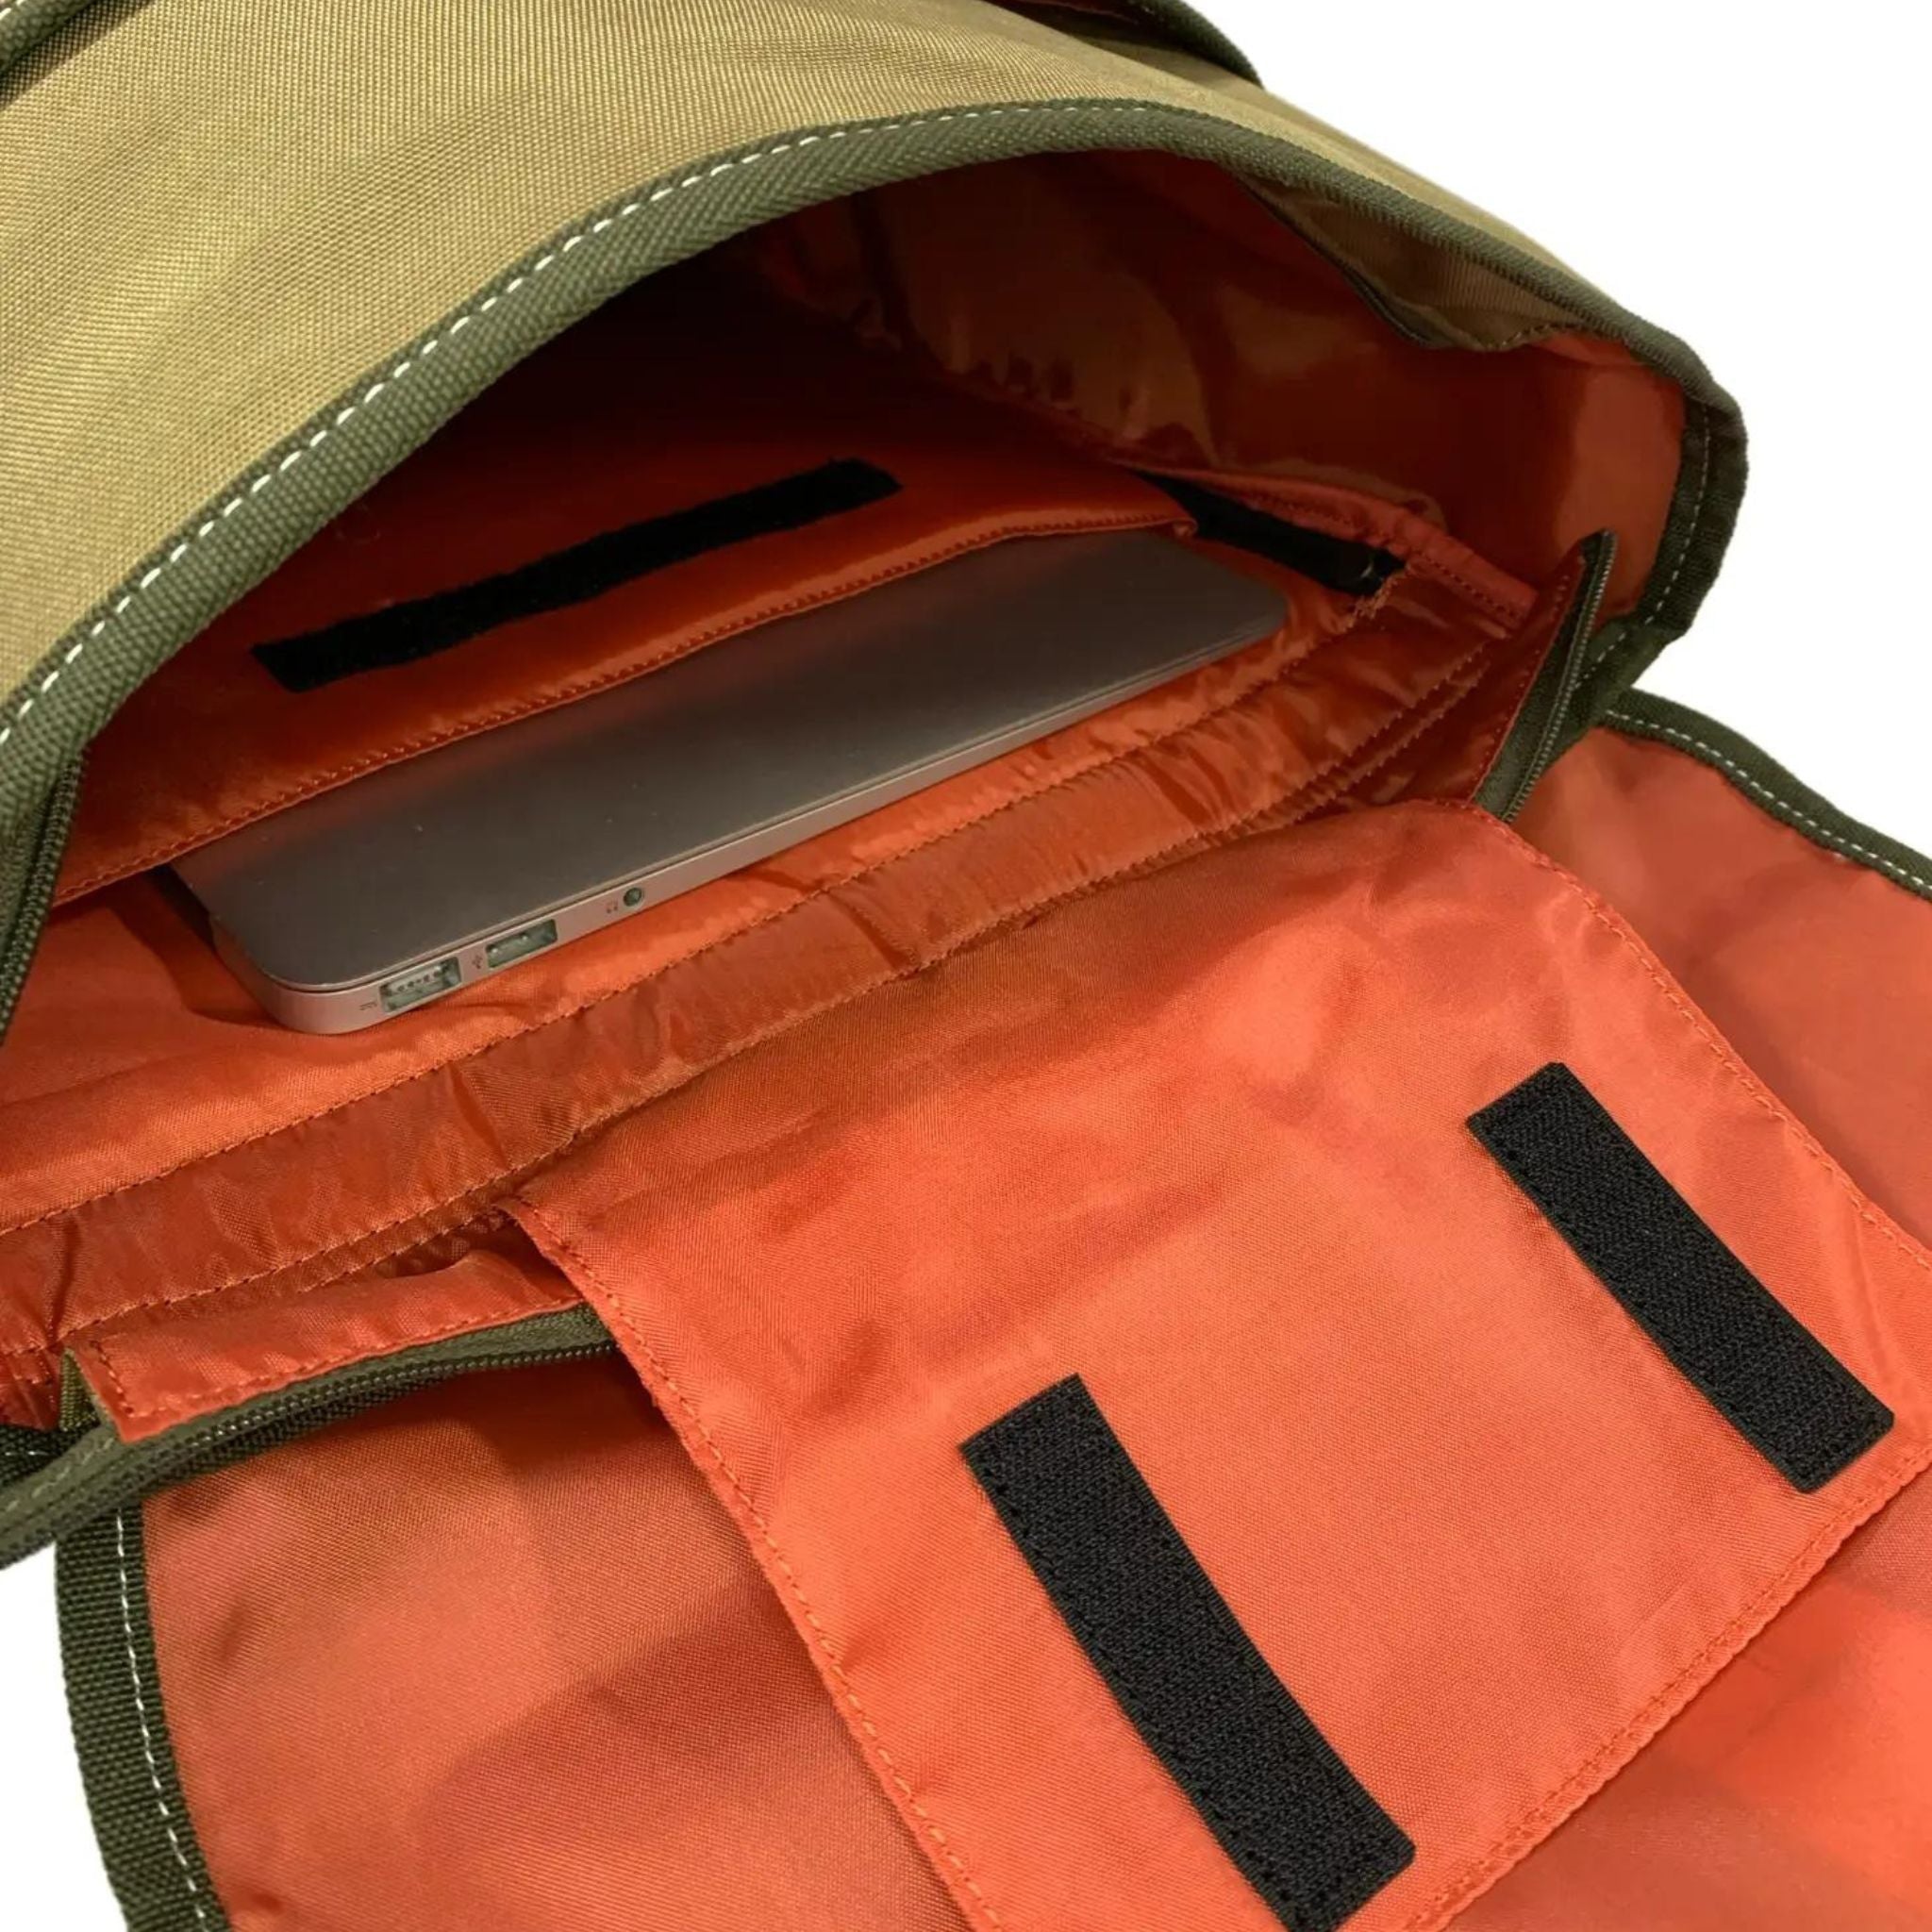 Flaptop Backpack 2.0 - Valley Variety